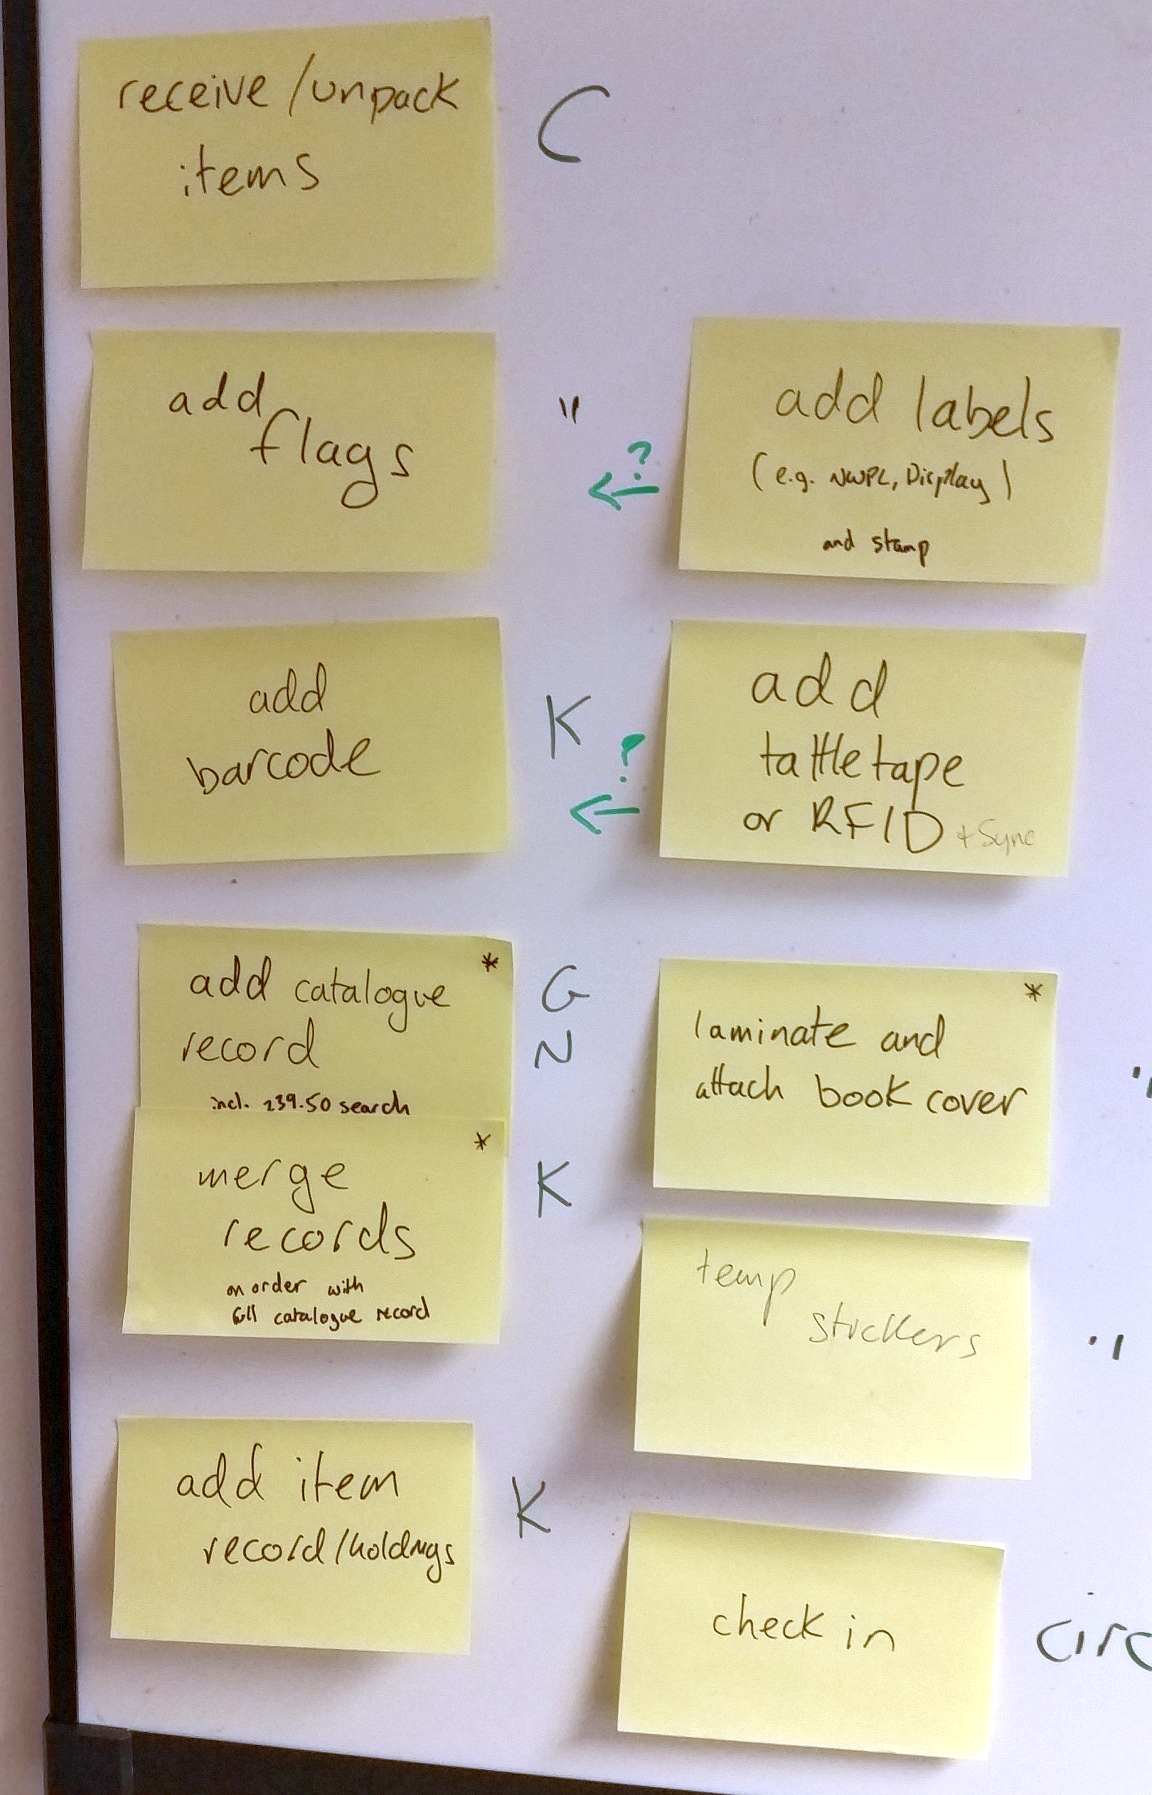 re-organized workflow using sticky notes